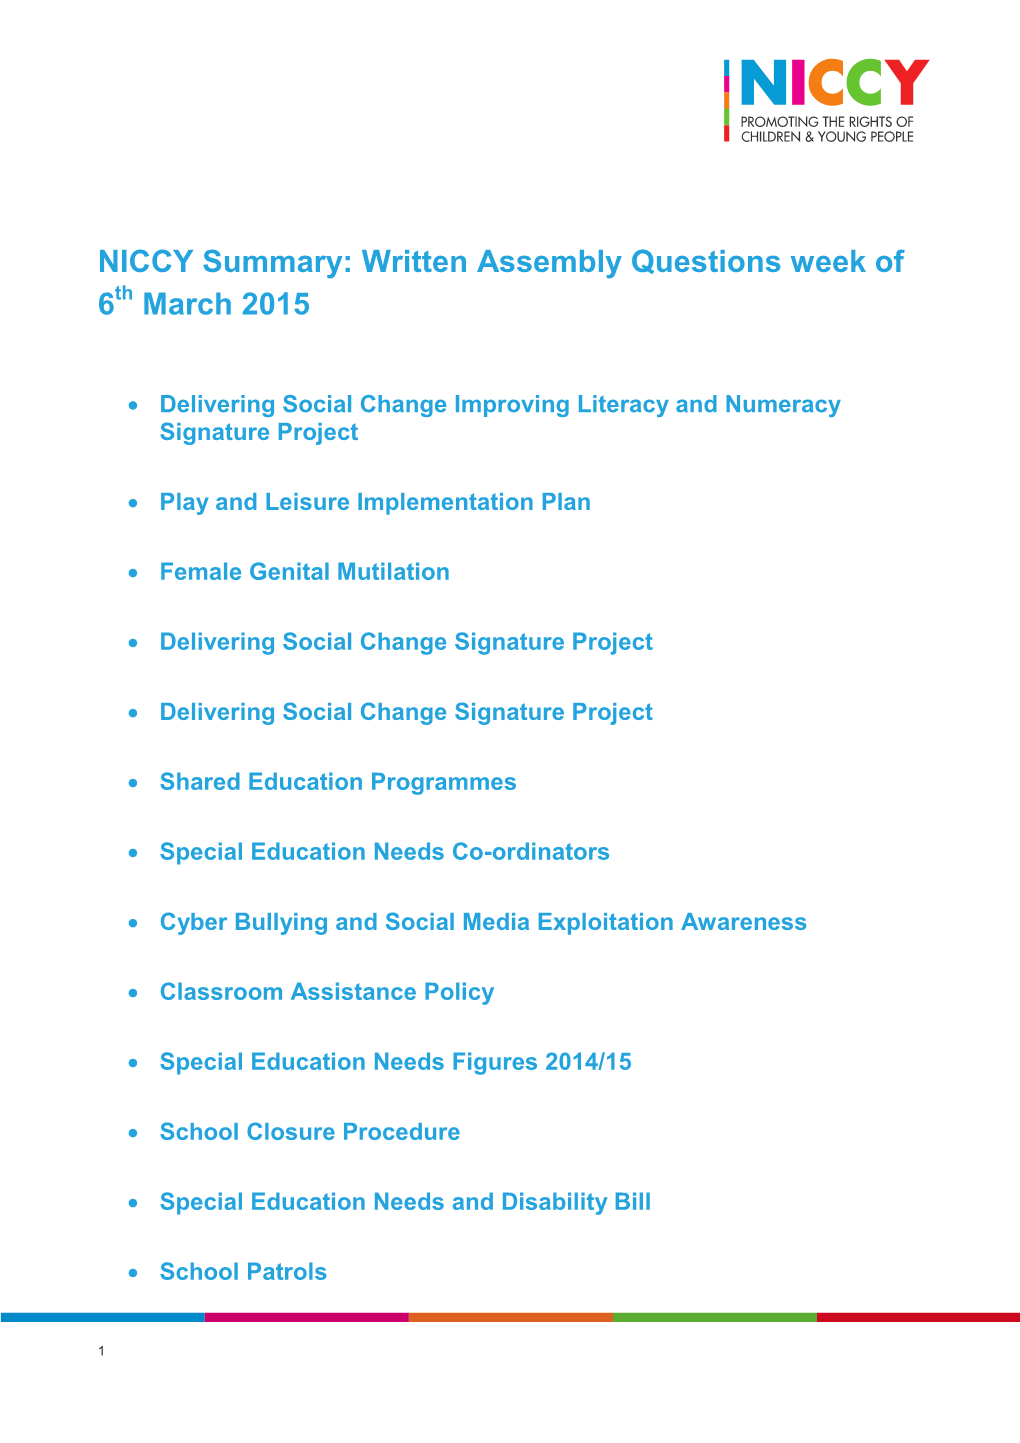 NICCY Summary: Written Assembly Questions Week of 6 March 2015